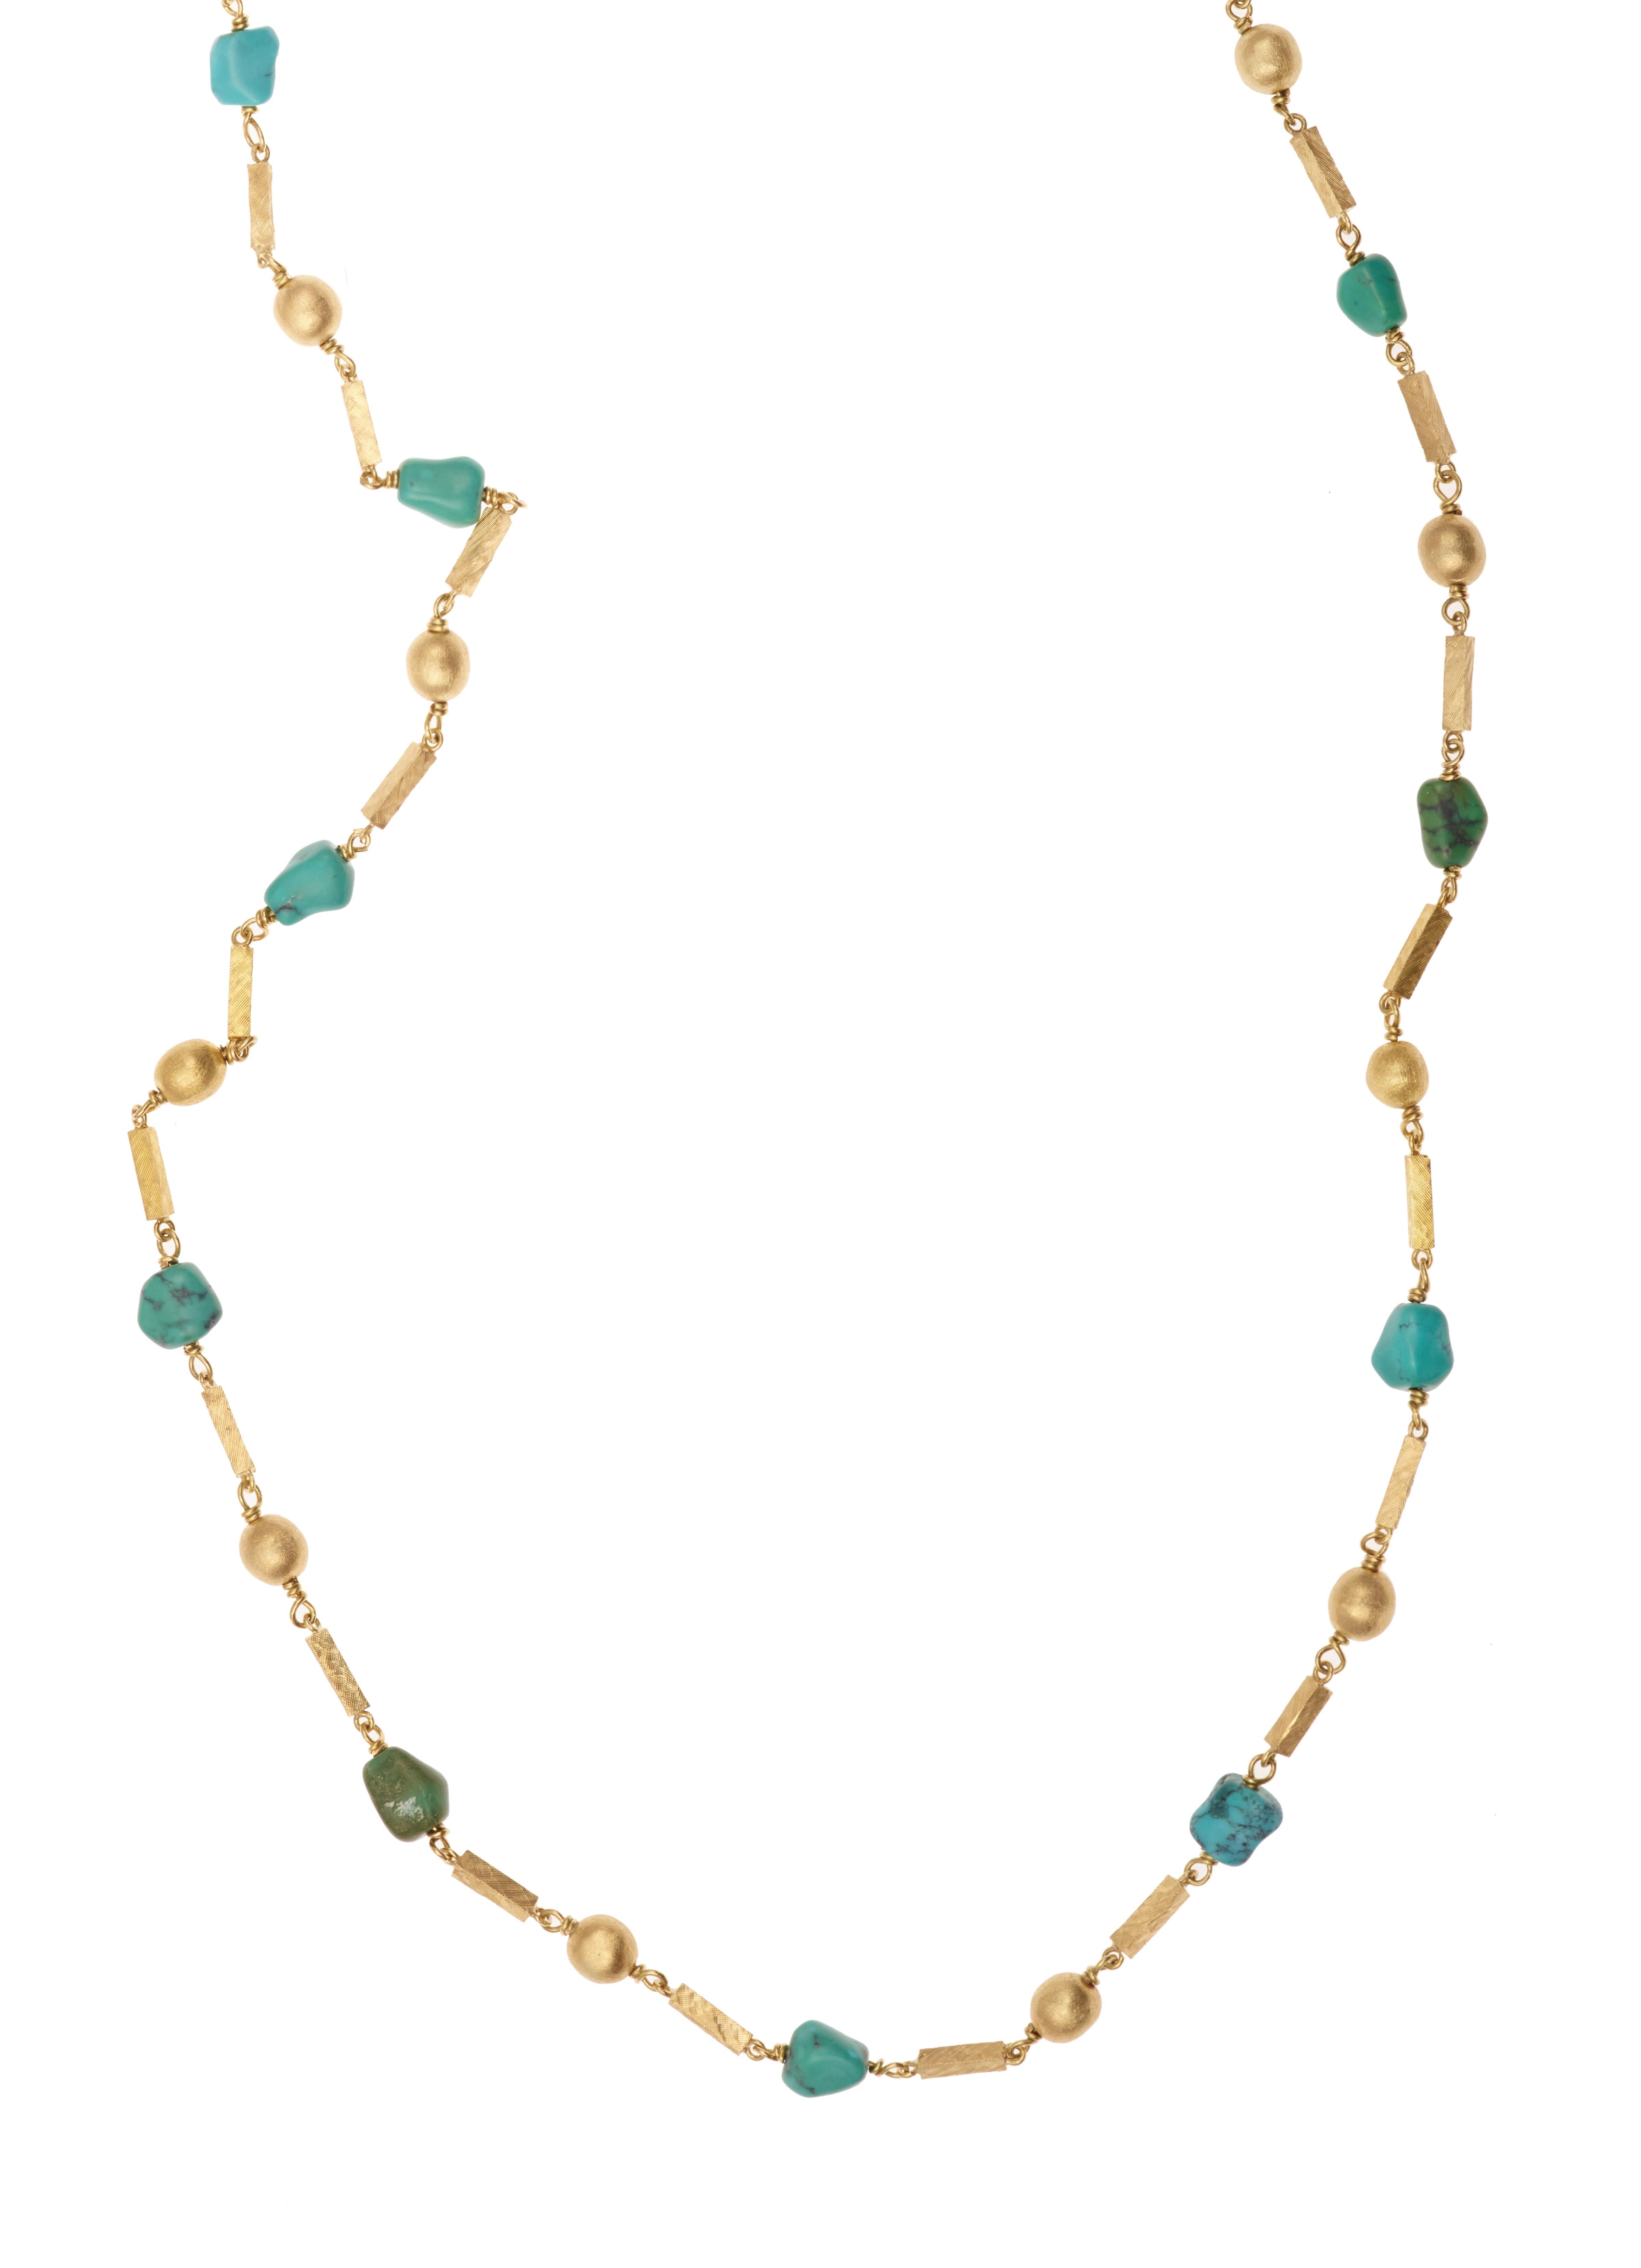 Long yellow frosted gold necklace with alternating turquoise, gold balls and rectangles. 

Length: 82 cm (32 inches)

Number of turquoise stones: 17

Number of gold balls: 18

Number of gold rectangles: 36

Ring clasp.

18 carats yellow gold,